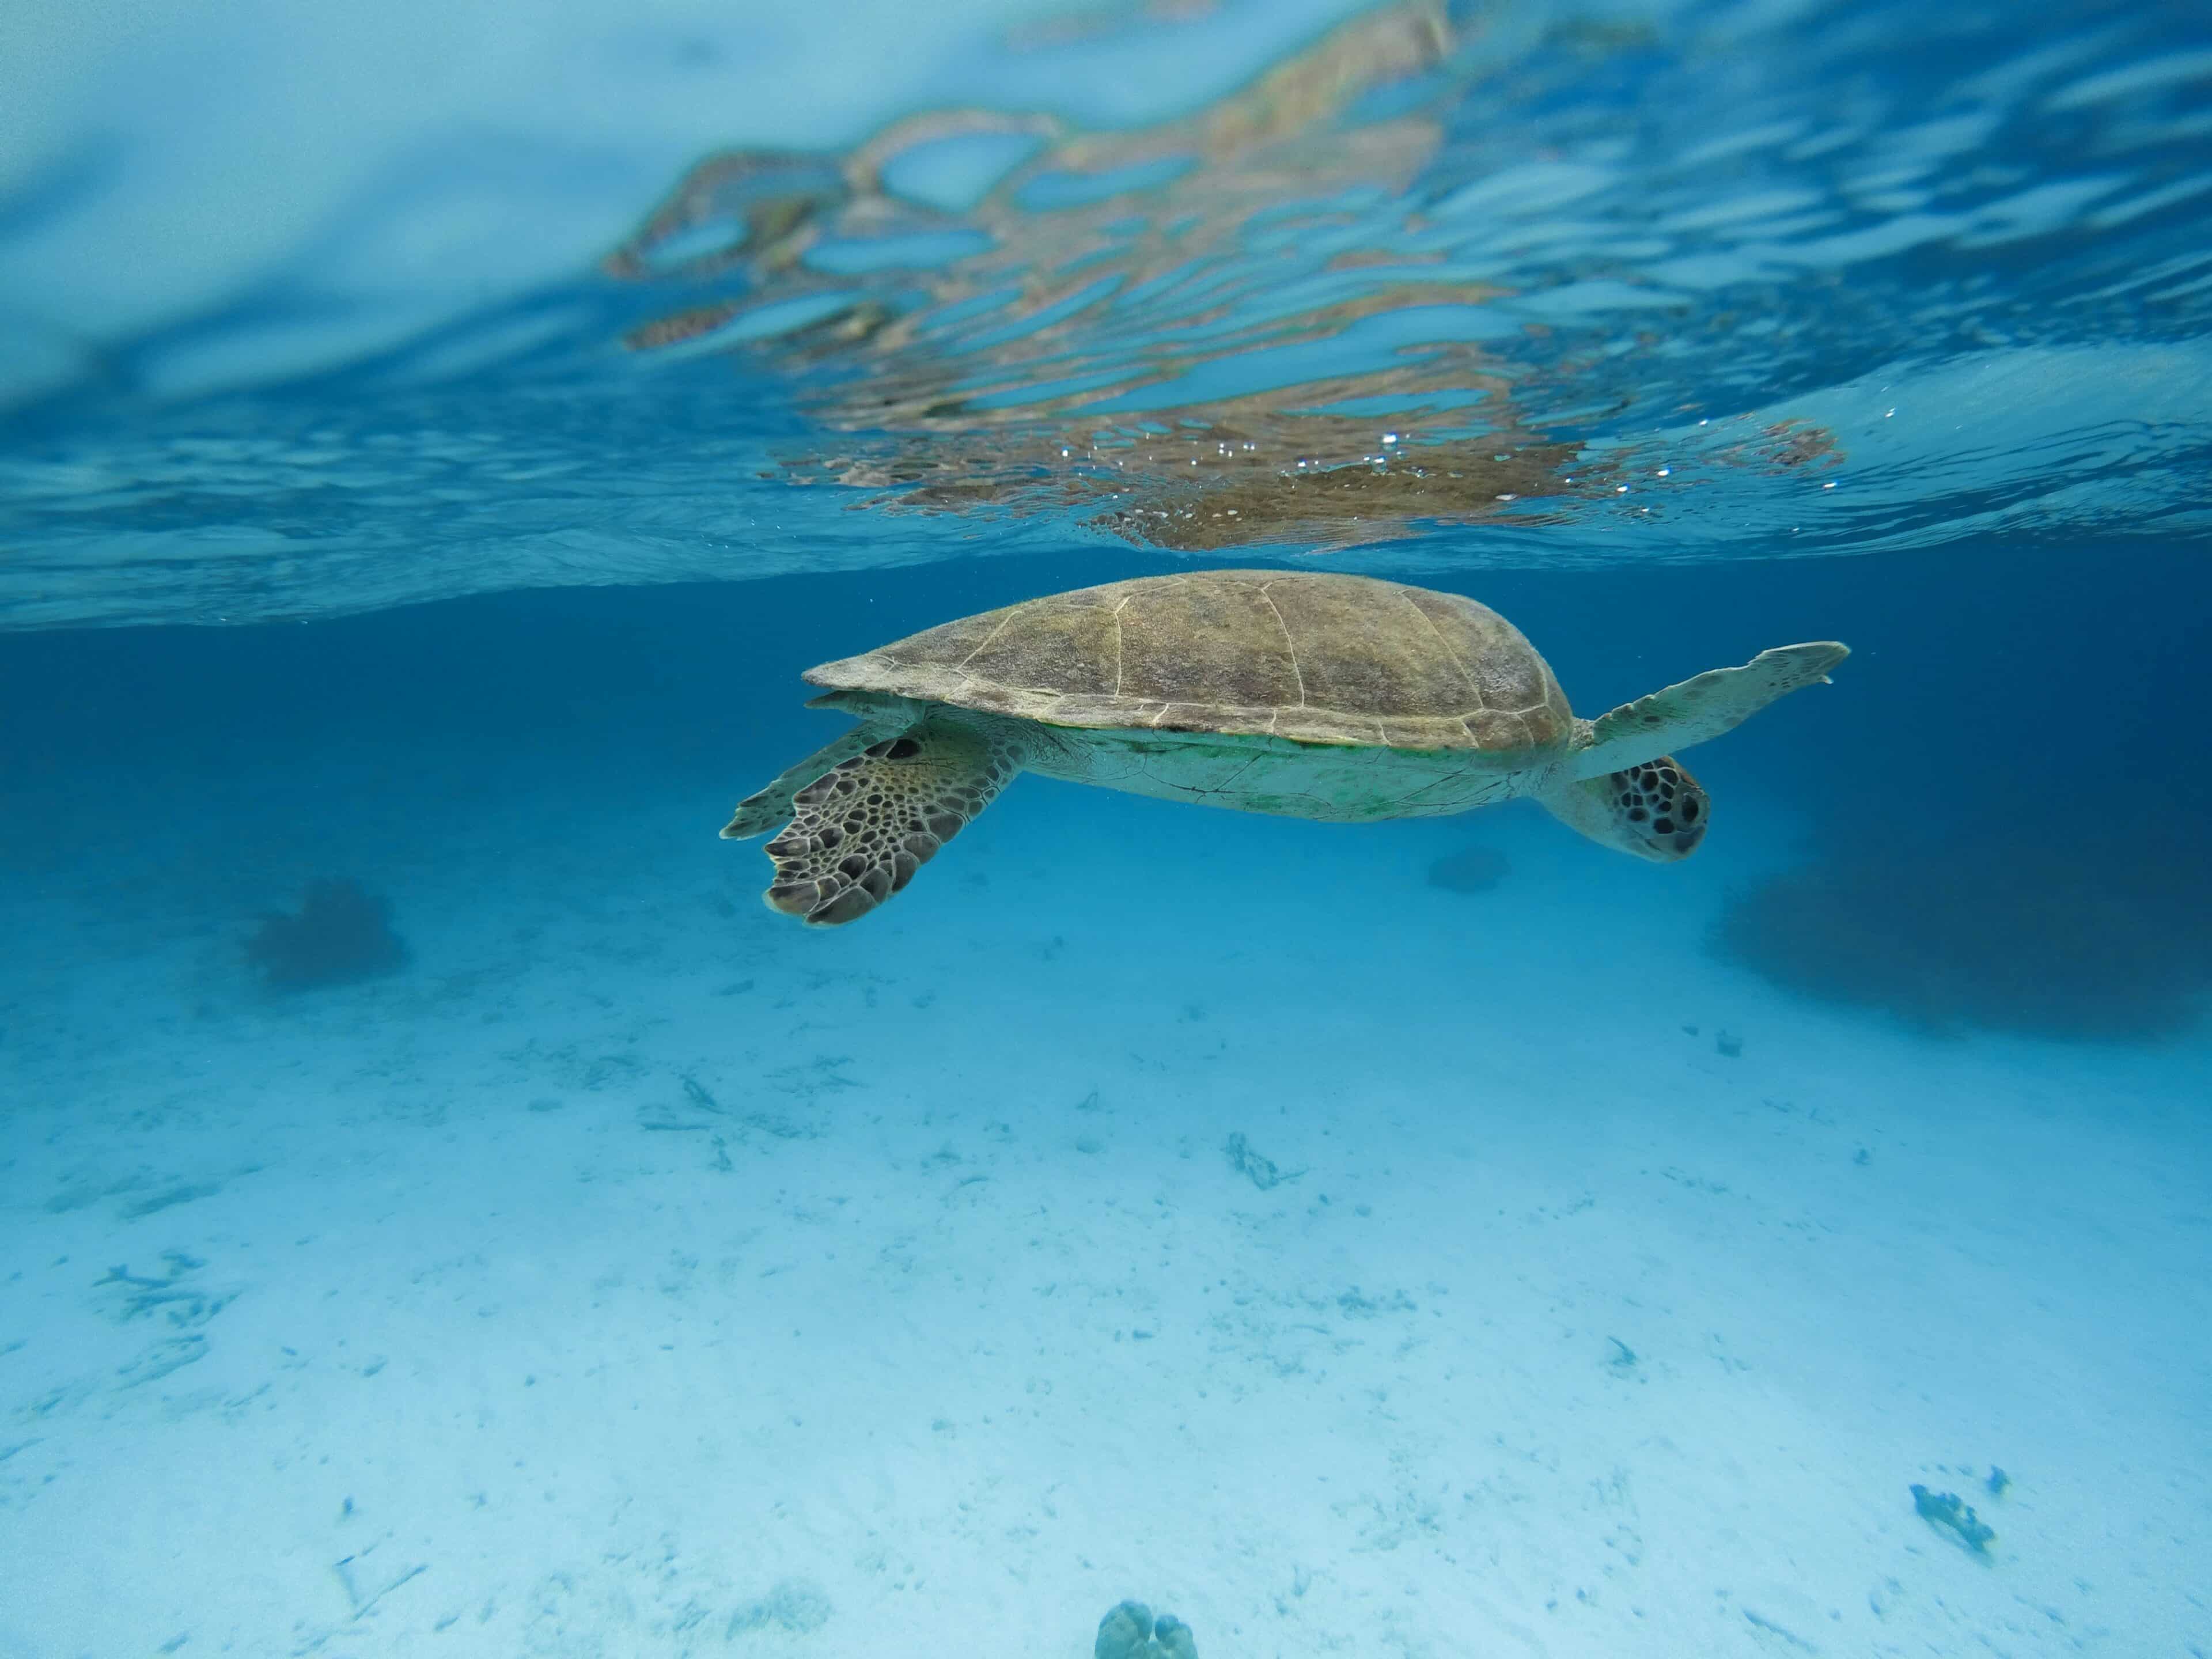 Responsible Tourism Practices for Turtle Conservation